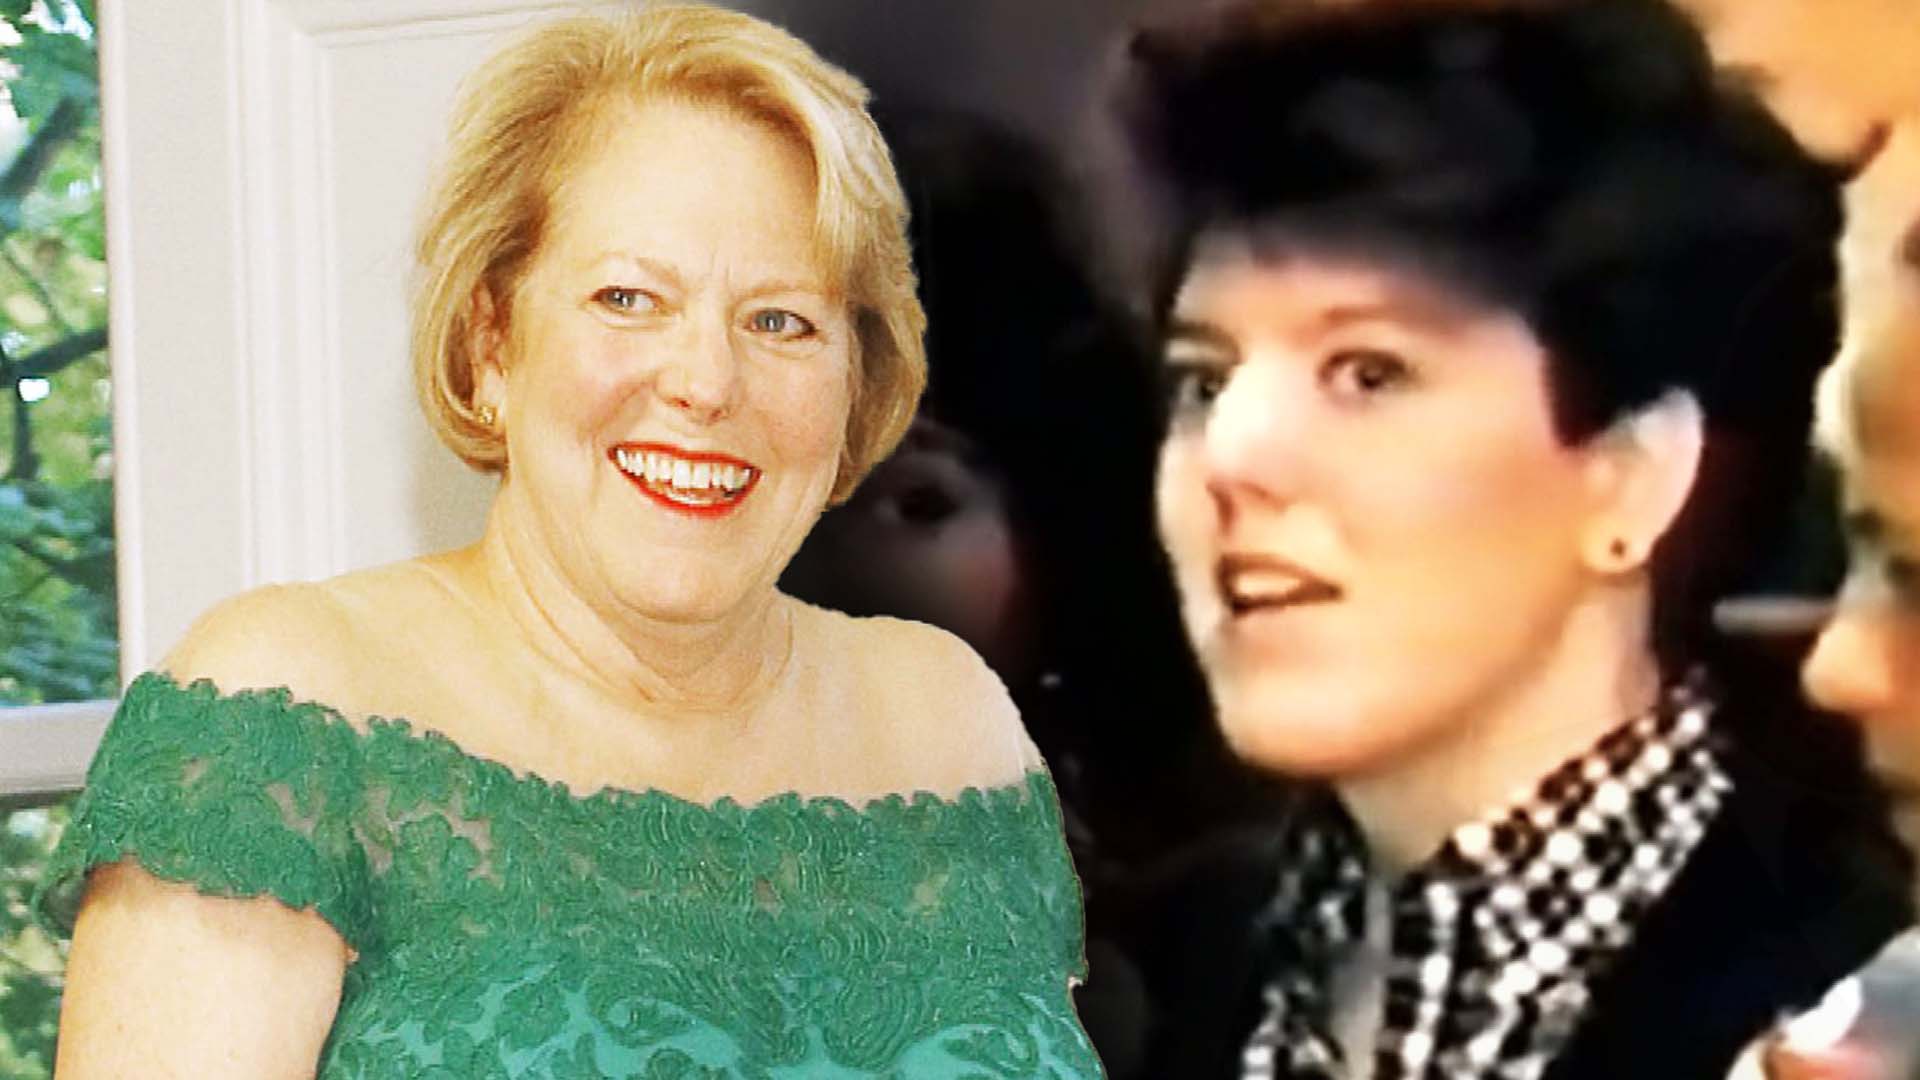 Justice Clarence Thomas’ Wife Ginni Thomas Talks About Her Past Life in a Cult